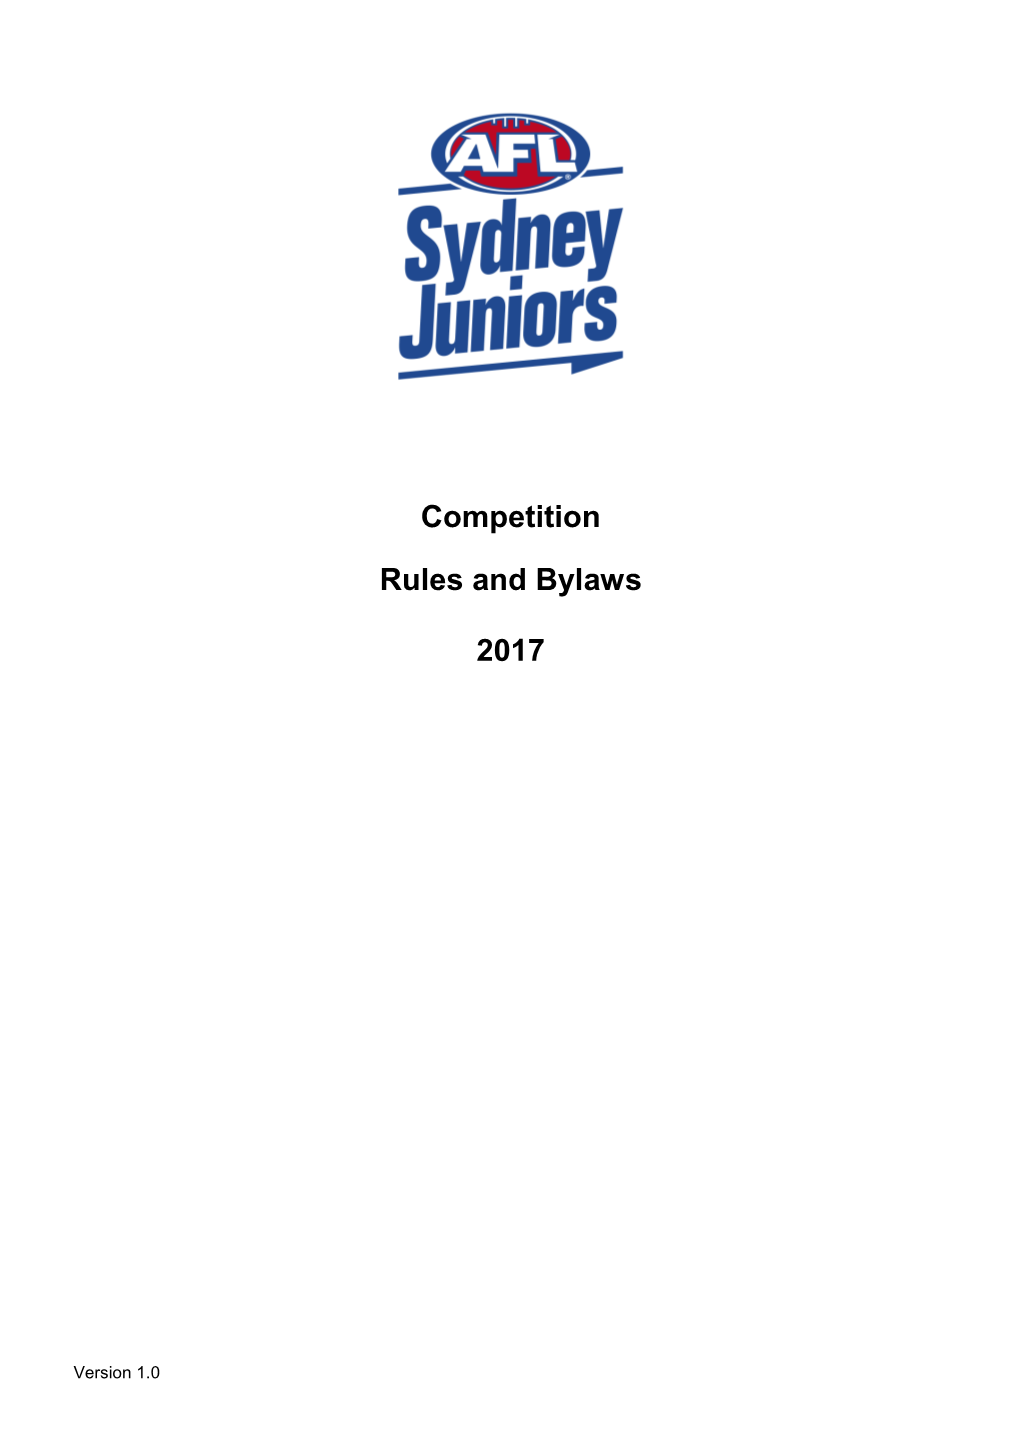 Competition Rules and Bylaws 2017